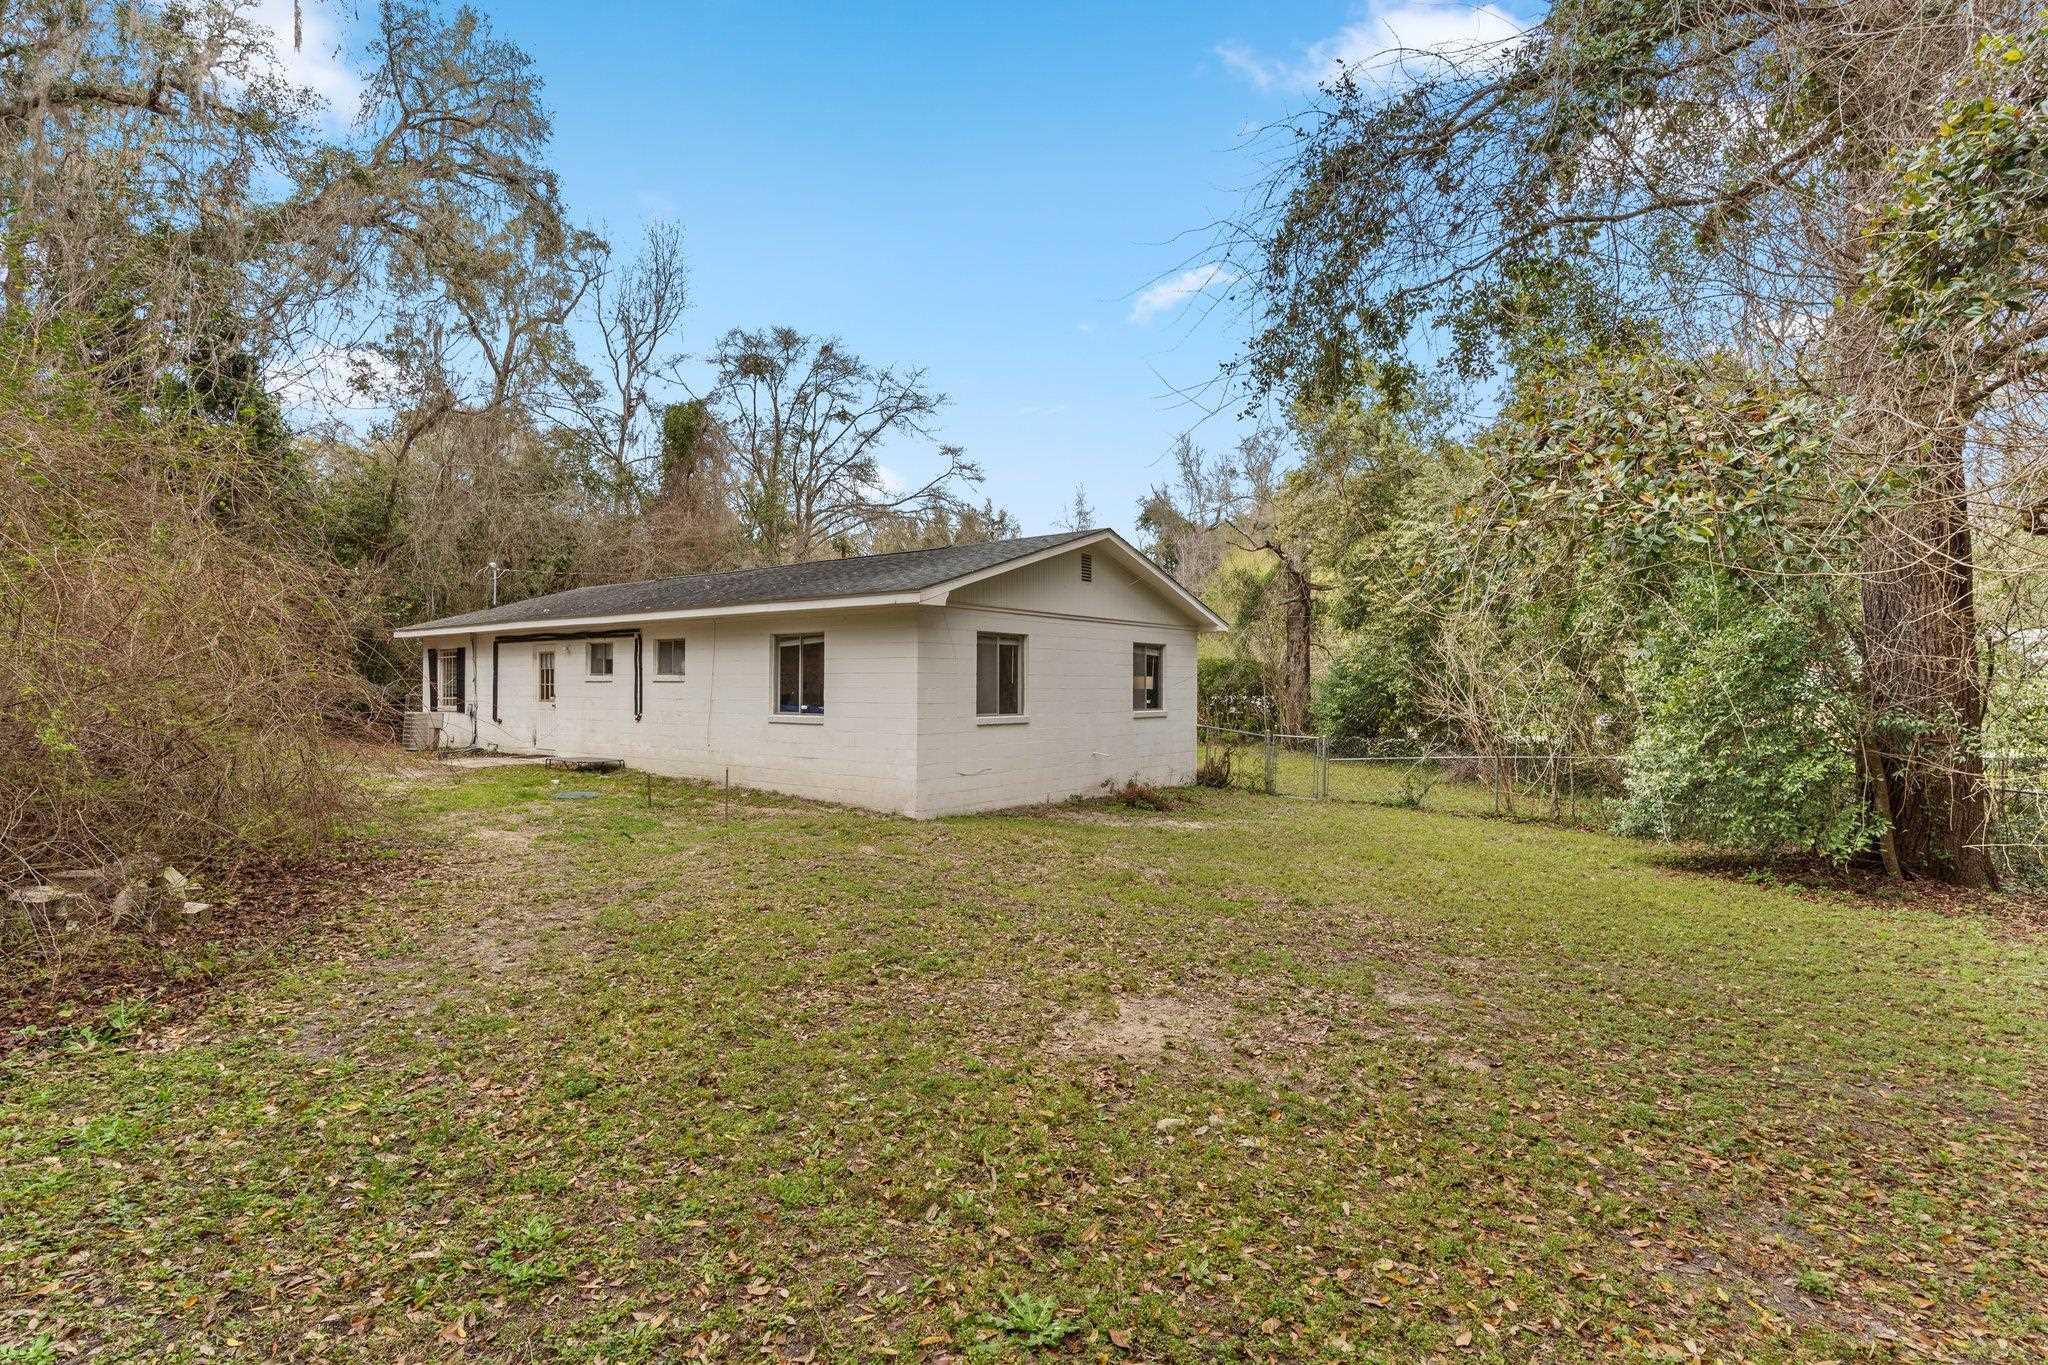 4865 Jackson Cove Road,TALLAHASSEE,Florida 32303,2 Bedrooms Bedrooms,1 BathroomBathrooms,Detached single family,4865 Jackson Cove Road,369172